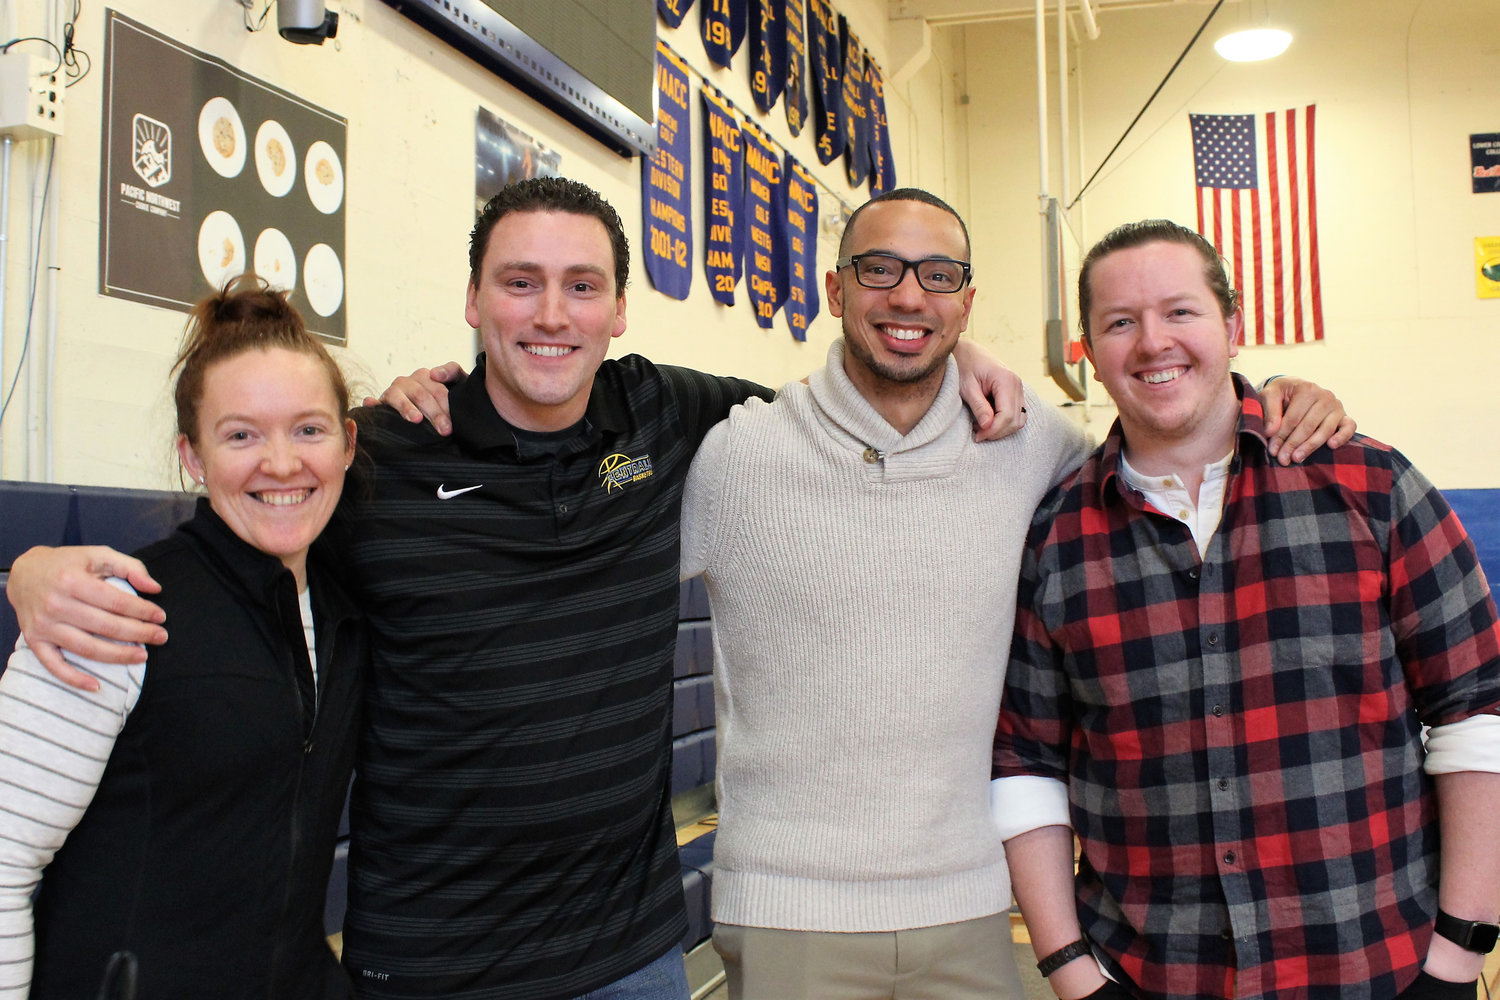 Pacific Northwest Cookie Company owner, Callie Carpenter, Centralia College Men's Basketball head coach, Jason Moir, assistant men's basketball coach Jonathan McMillan and PNW Cookie Company operations Manager, Alex Carpenter, pose in front of the Chehalis company's banner in the Centralia College gymnasium. The company is sponsoring an upcoming cookie giveaway and other sponsorship activities to bolster the amount players will receive to offset their food costs during away games and tournaments.